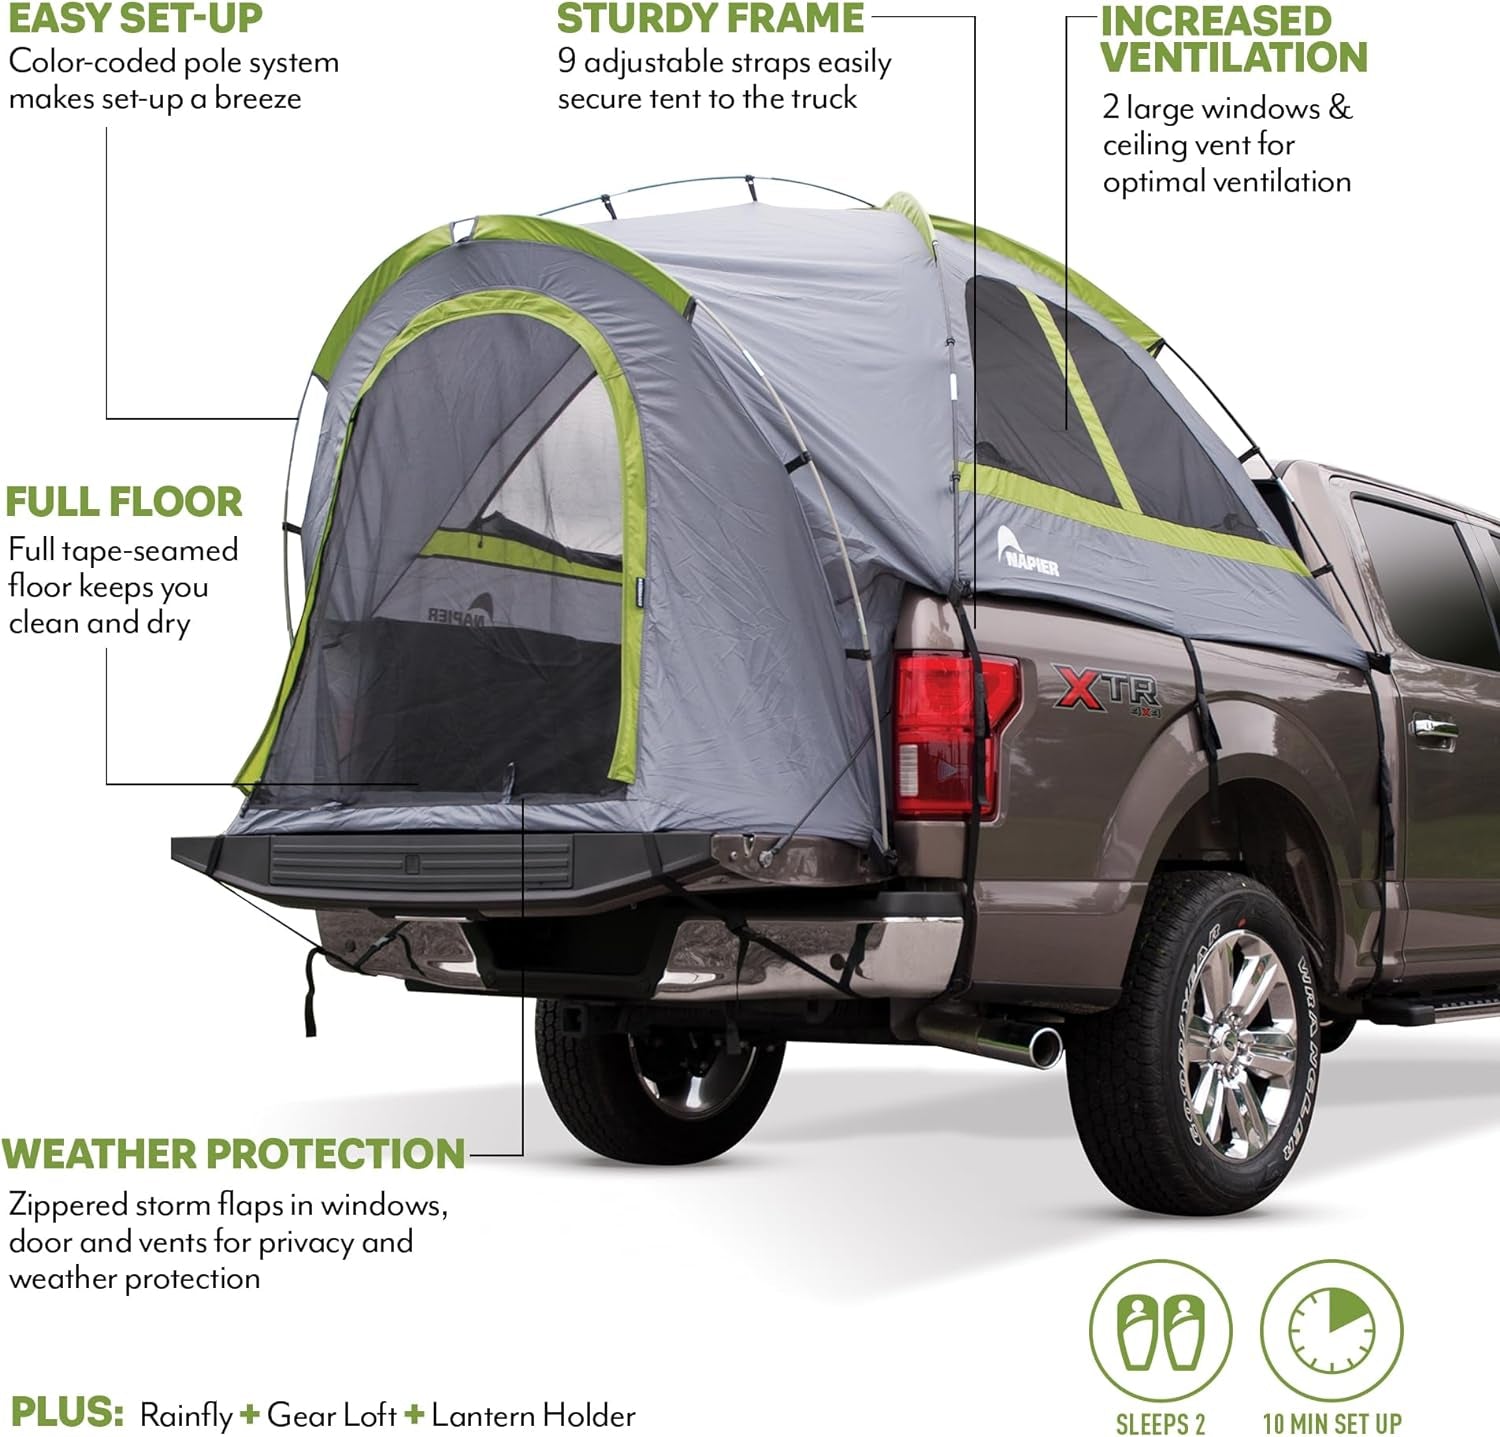 Napier Backroadz Truck Bed with Waterproof Material Coating, Comfortable and Spacious 2 Person Camping Tent, Compact and Full Size Regular Bed Long Bed, Waterproof Bed Tent, Durable and Sturdy Tent